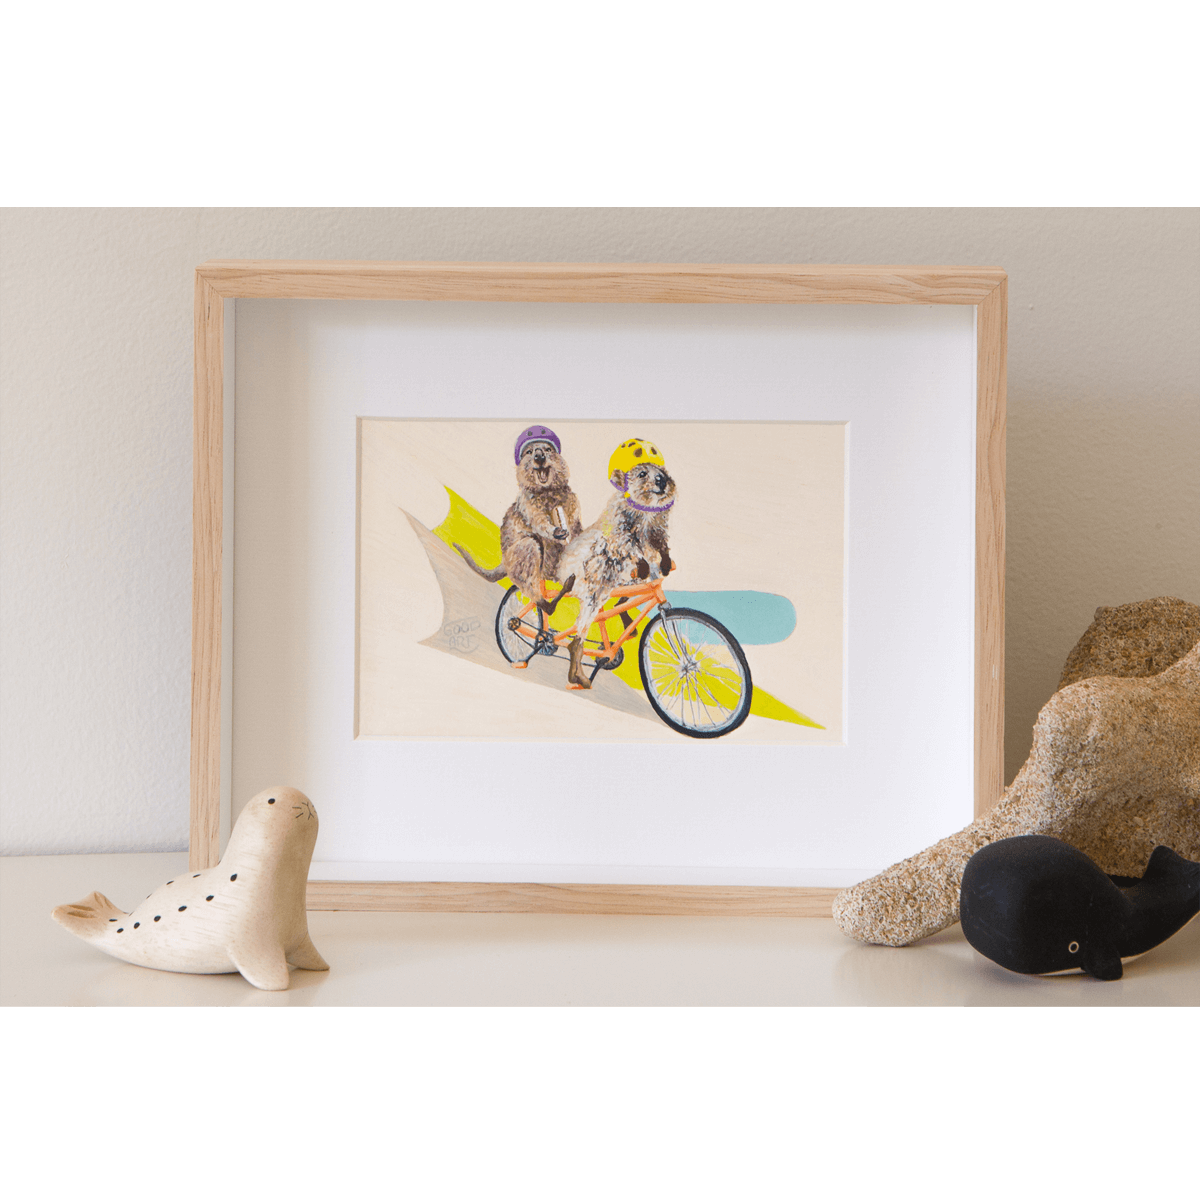 an artwork of two Rottnest quokkas riding a tandem bike. The laughing quokka at the back with legs in the air isn’t peddling but instead is eating a cream bun. Framed original painting of quokkas on a shelf.